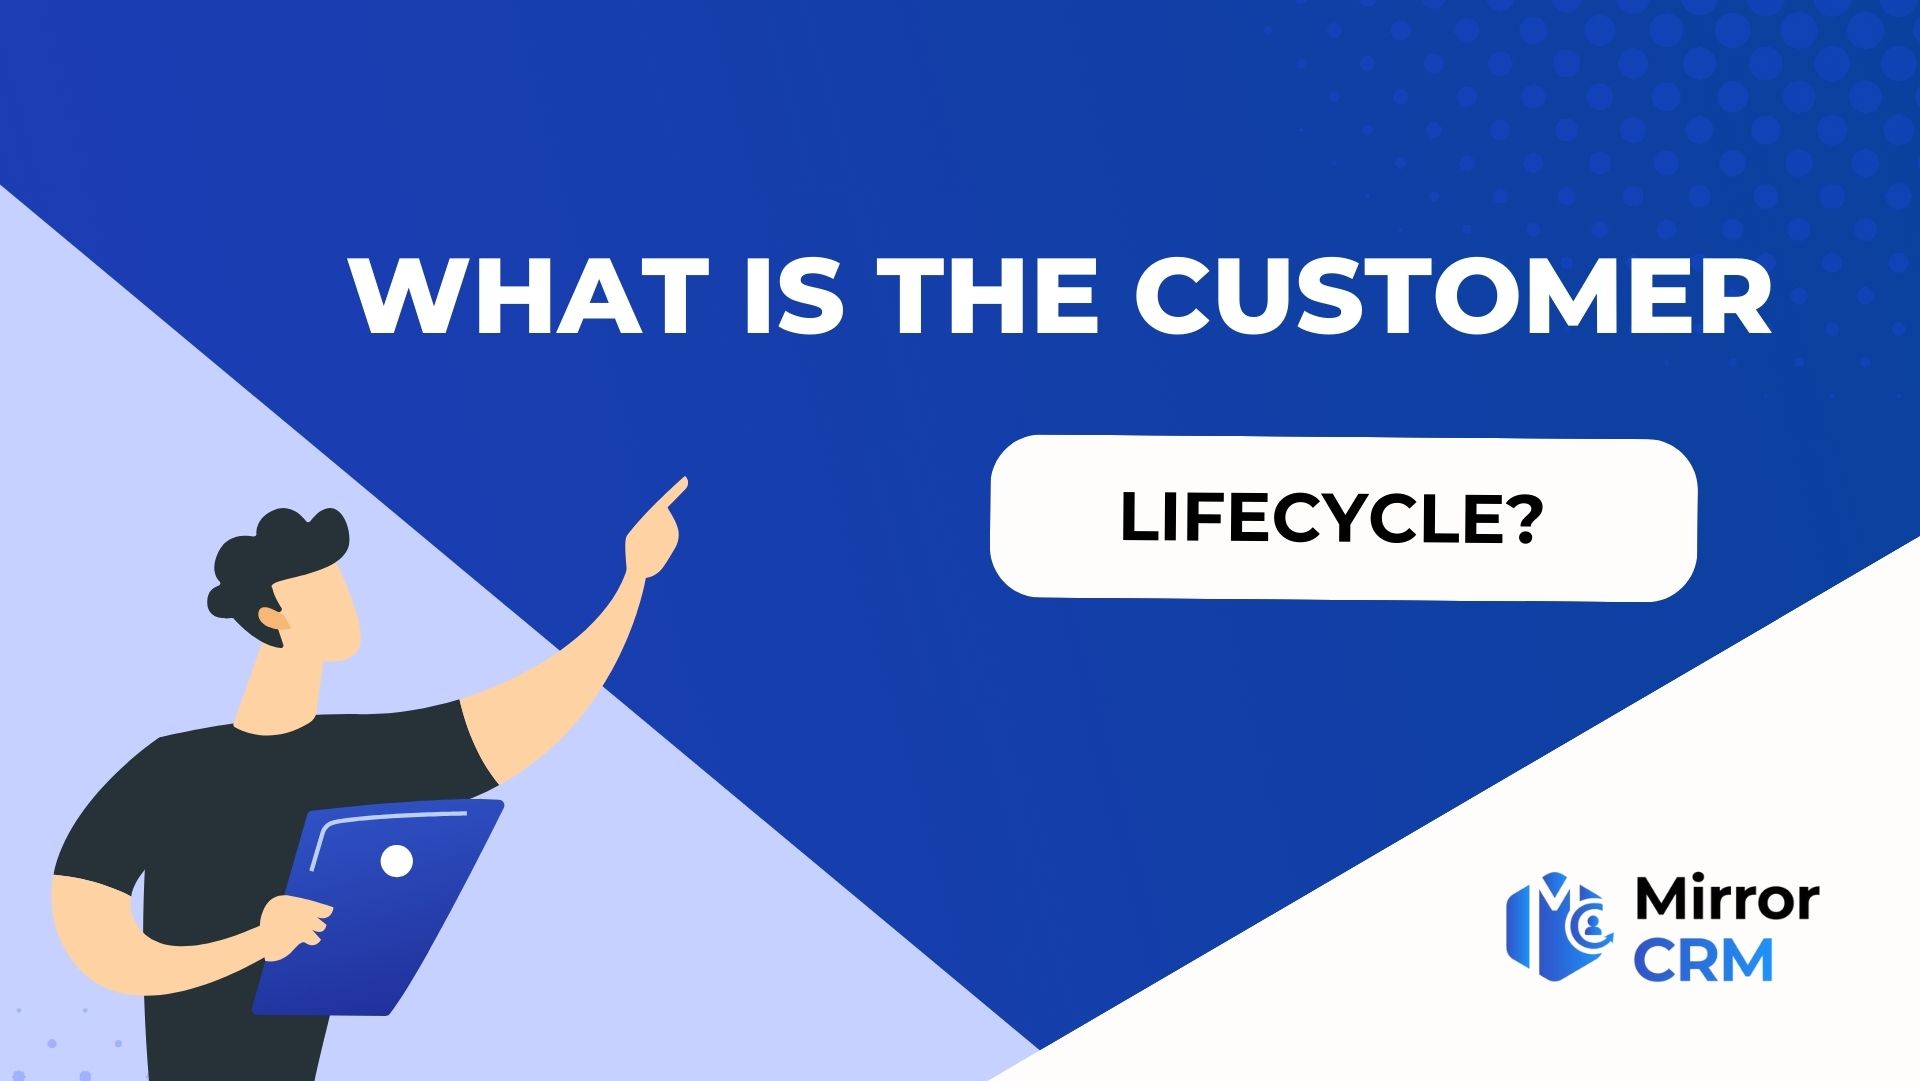 What is the customer lifecycle?